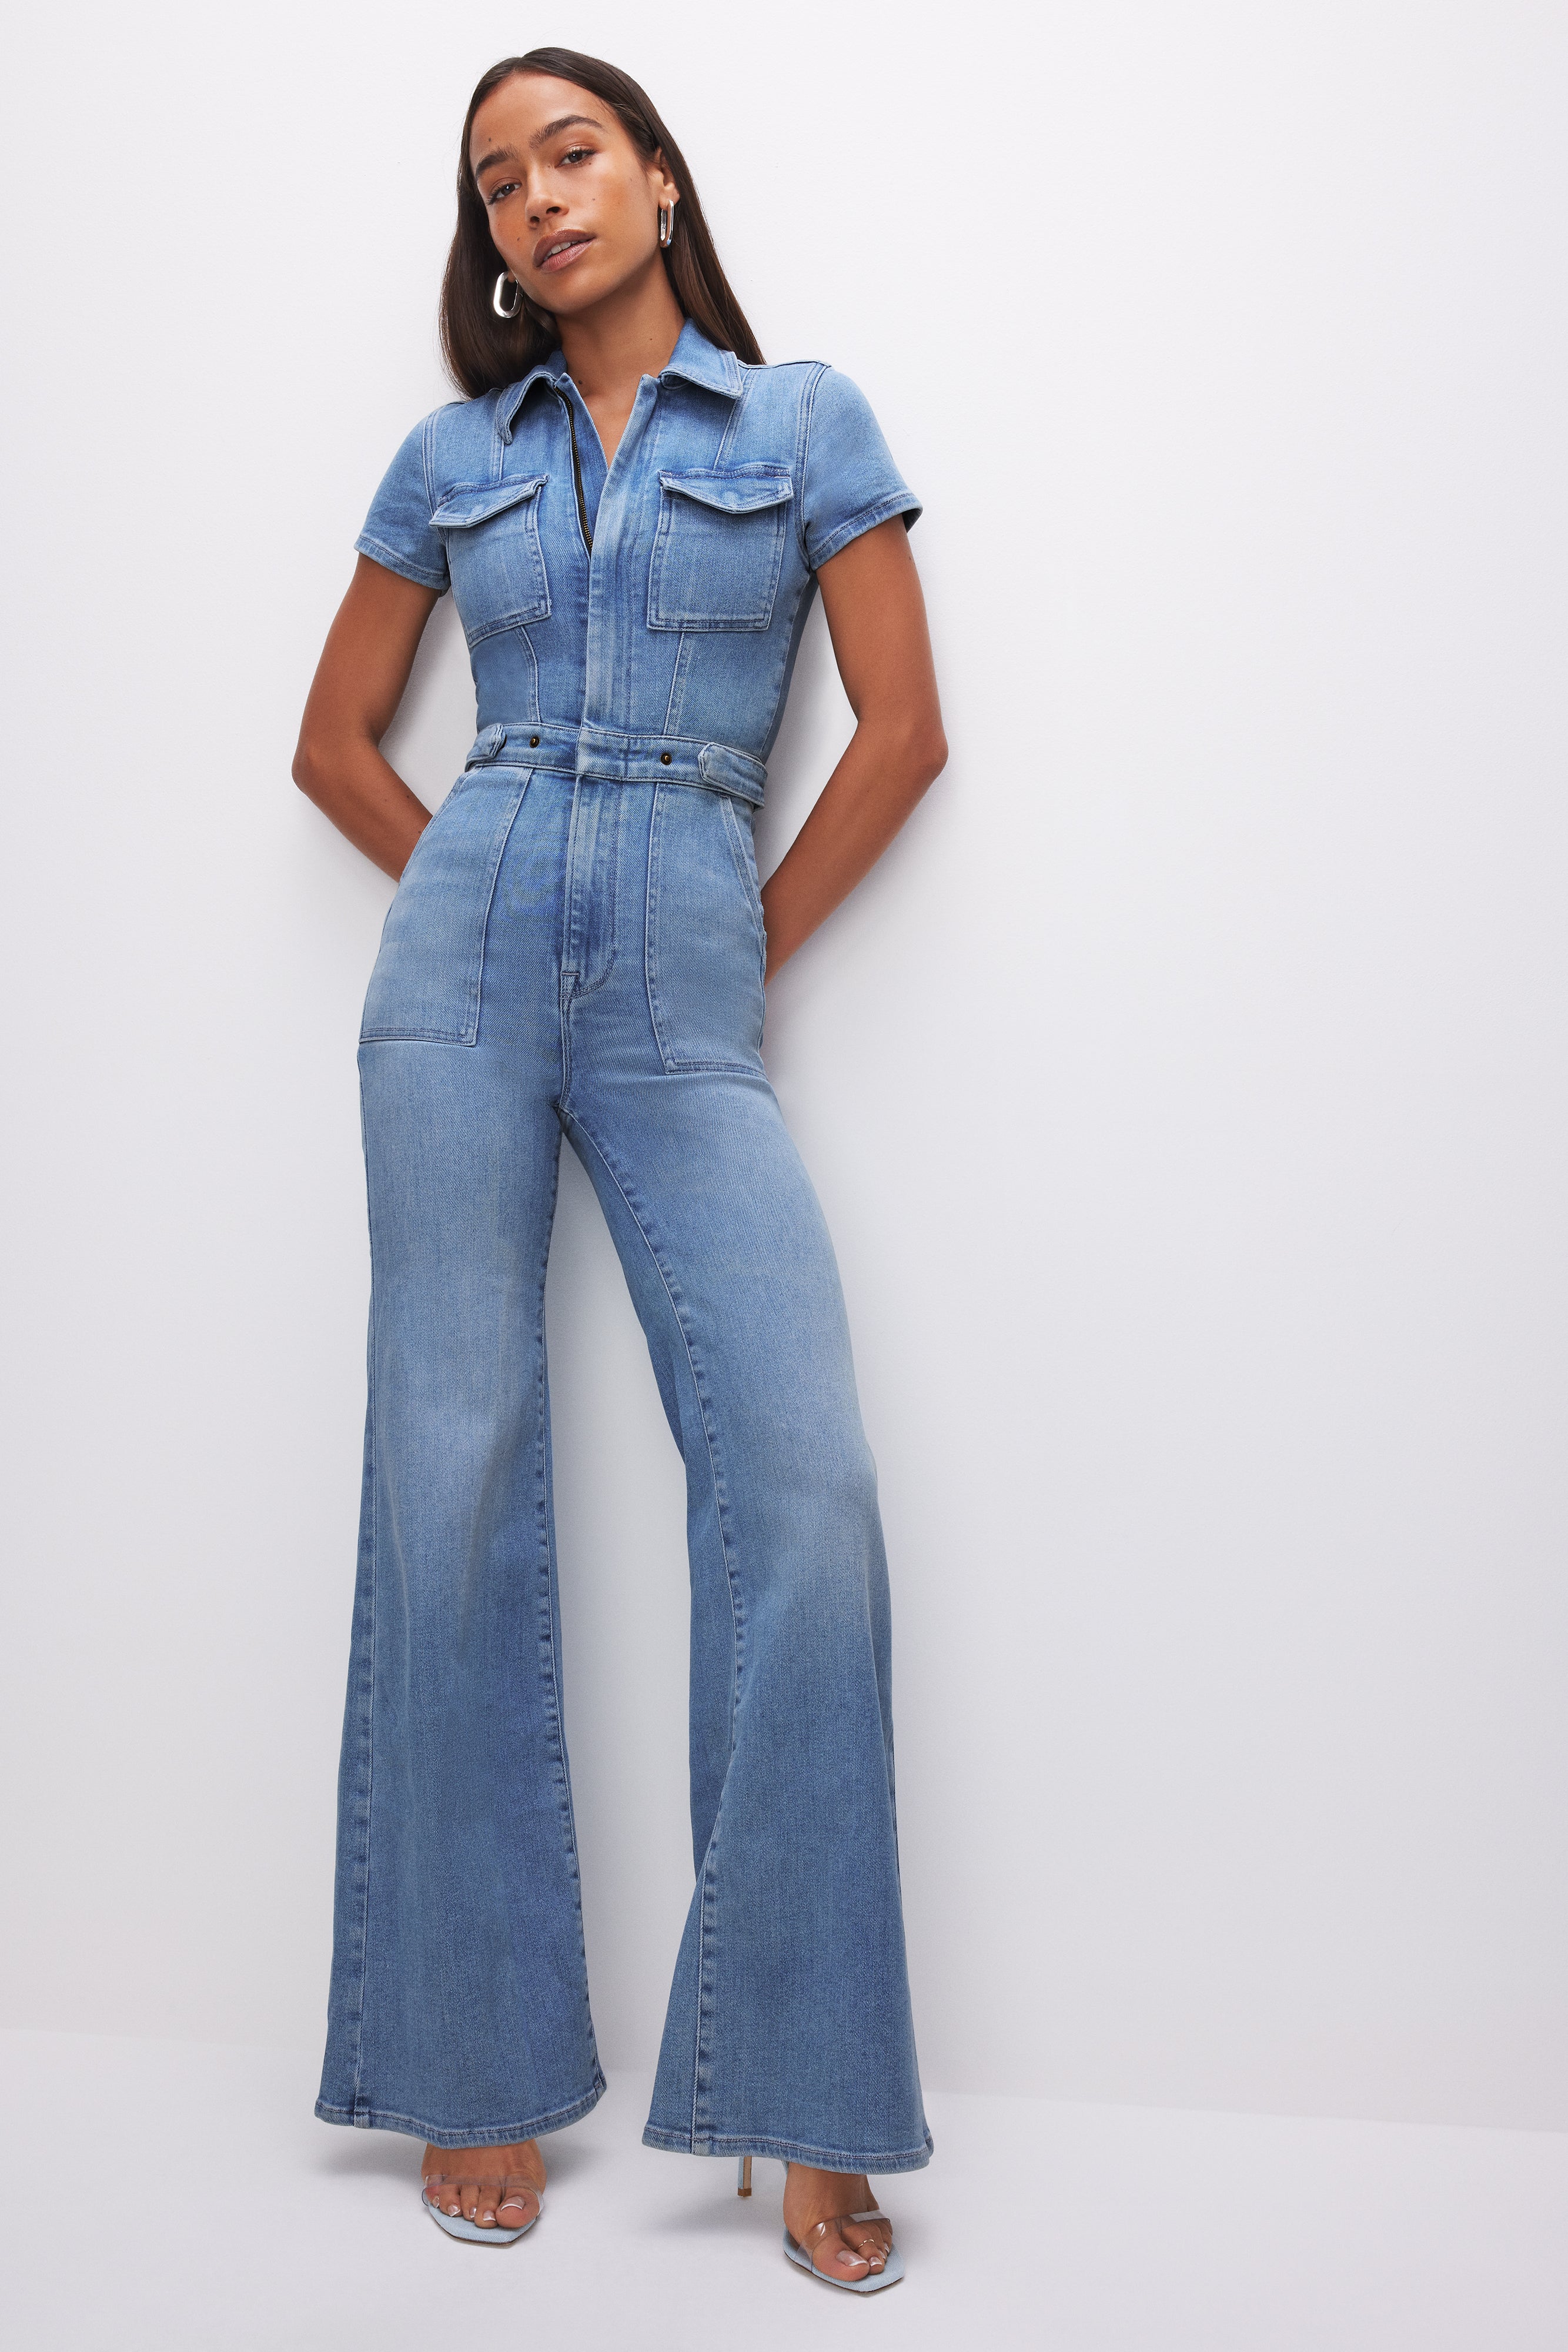 FIT FOR SUCCESS PALAZZO JUMPSUIT | BLUE274 - GOOD AMERICAN